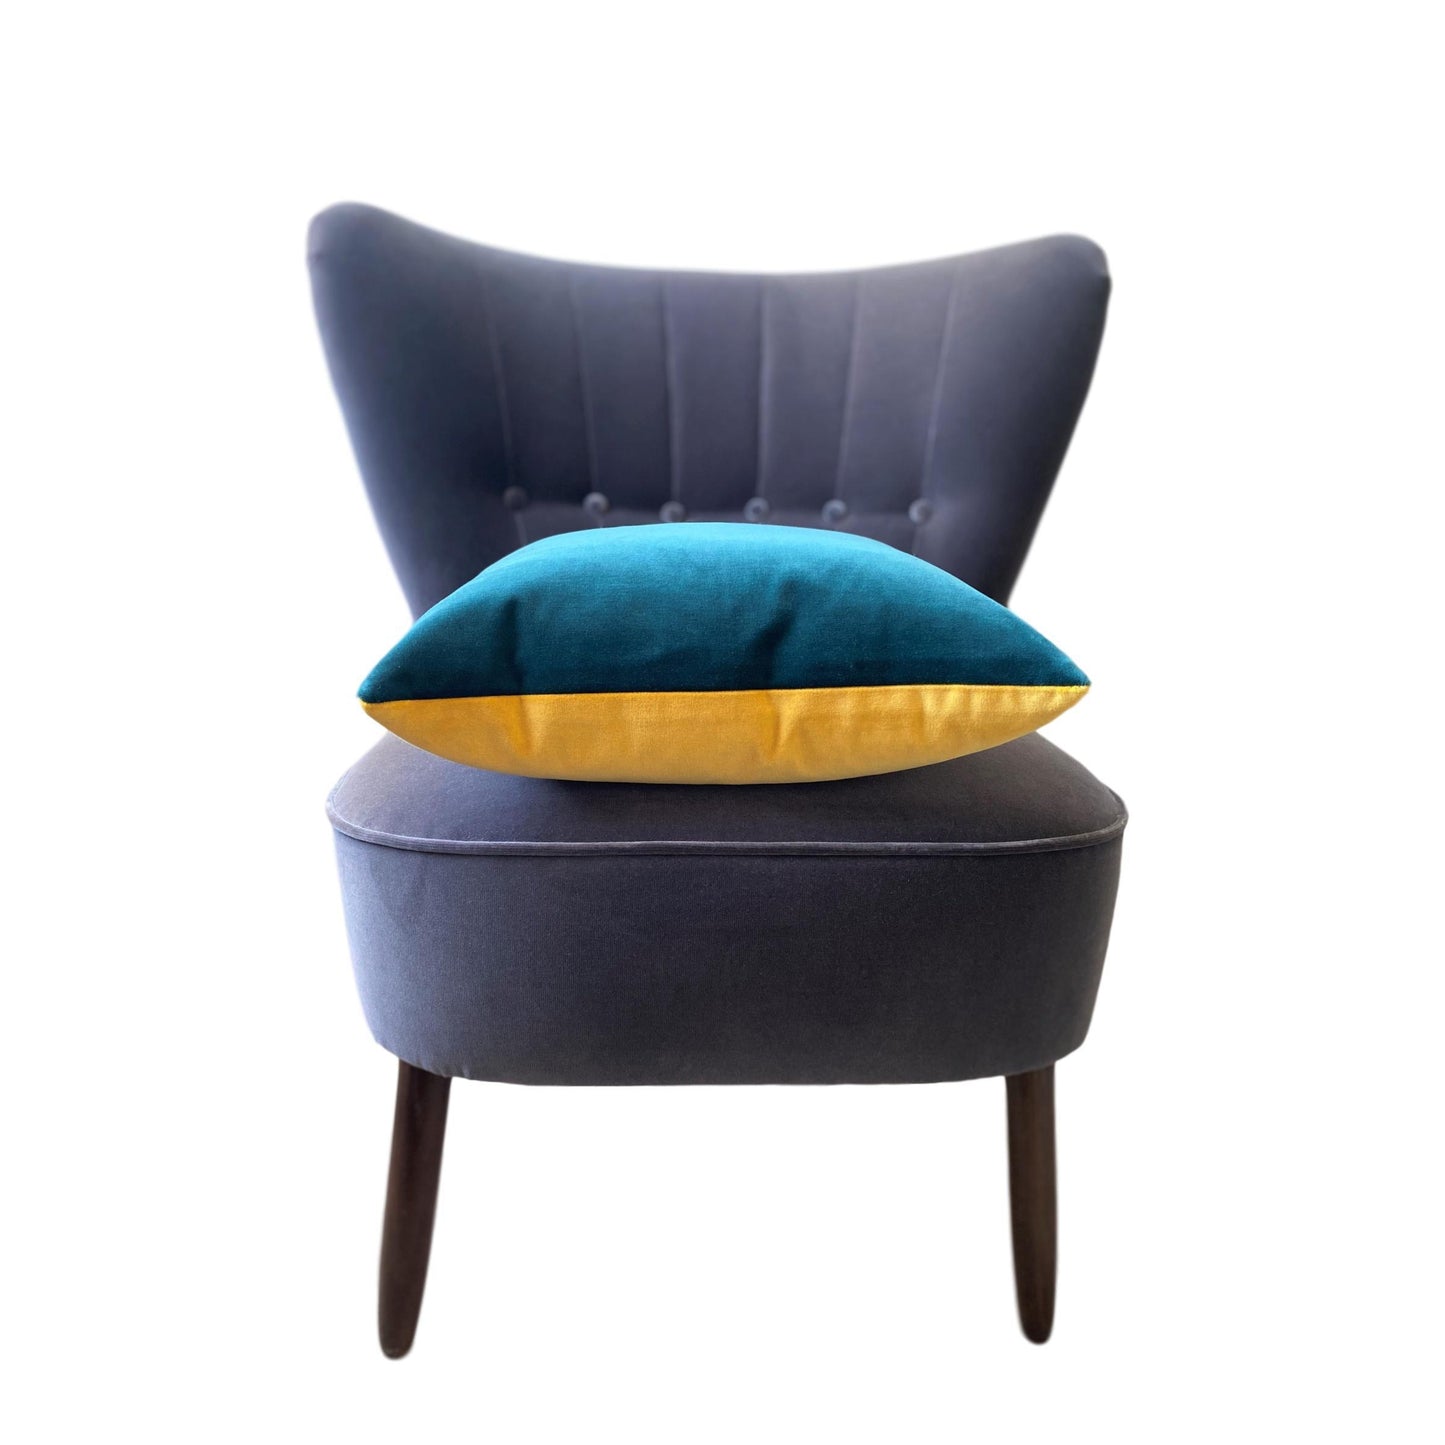 Teal and yellow cushion by luxe 39